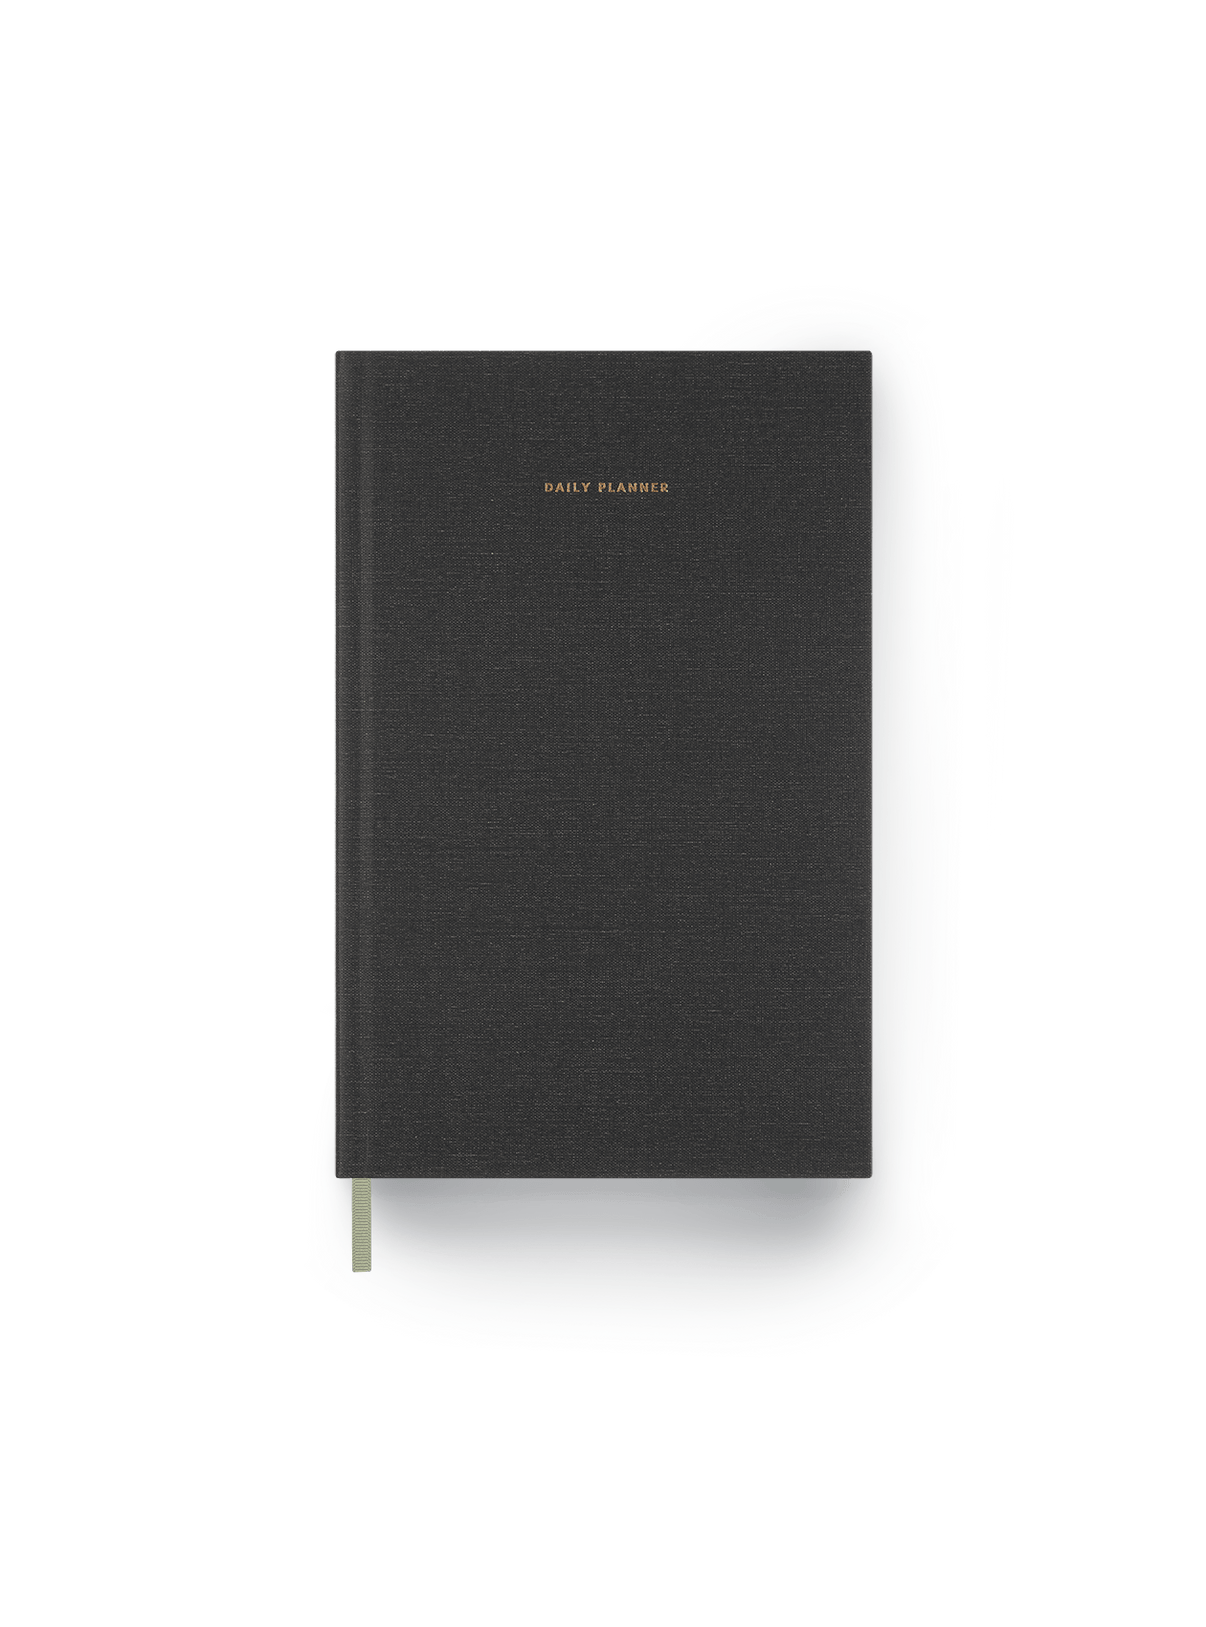 Appointed 23-24 hardcover Daily Planner in Charcoal Gray